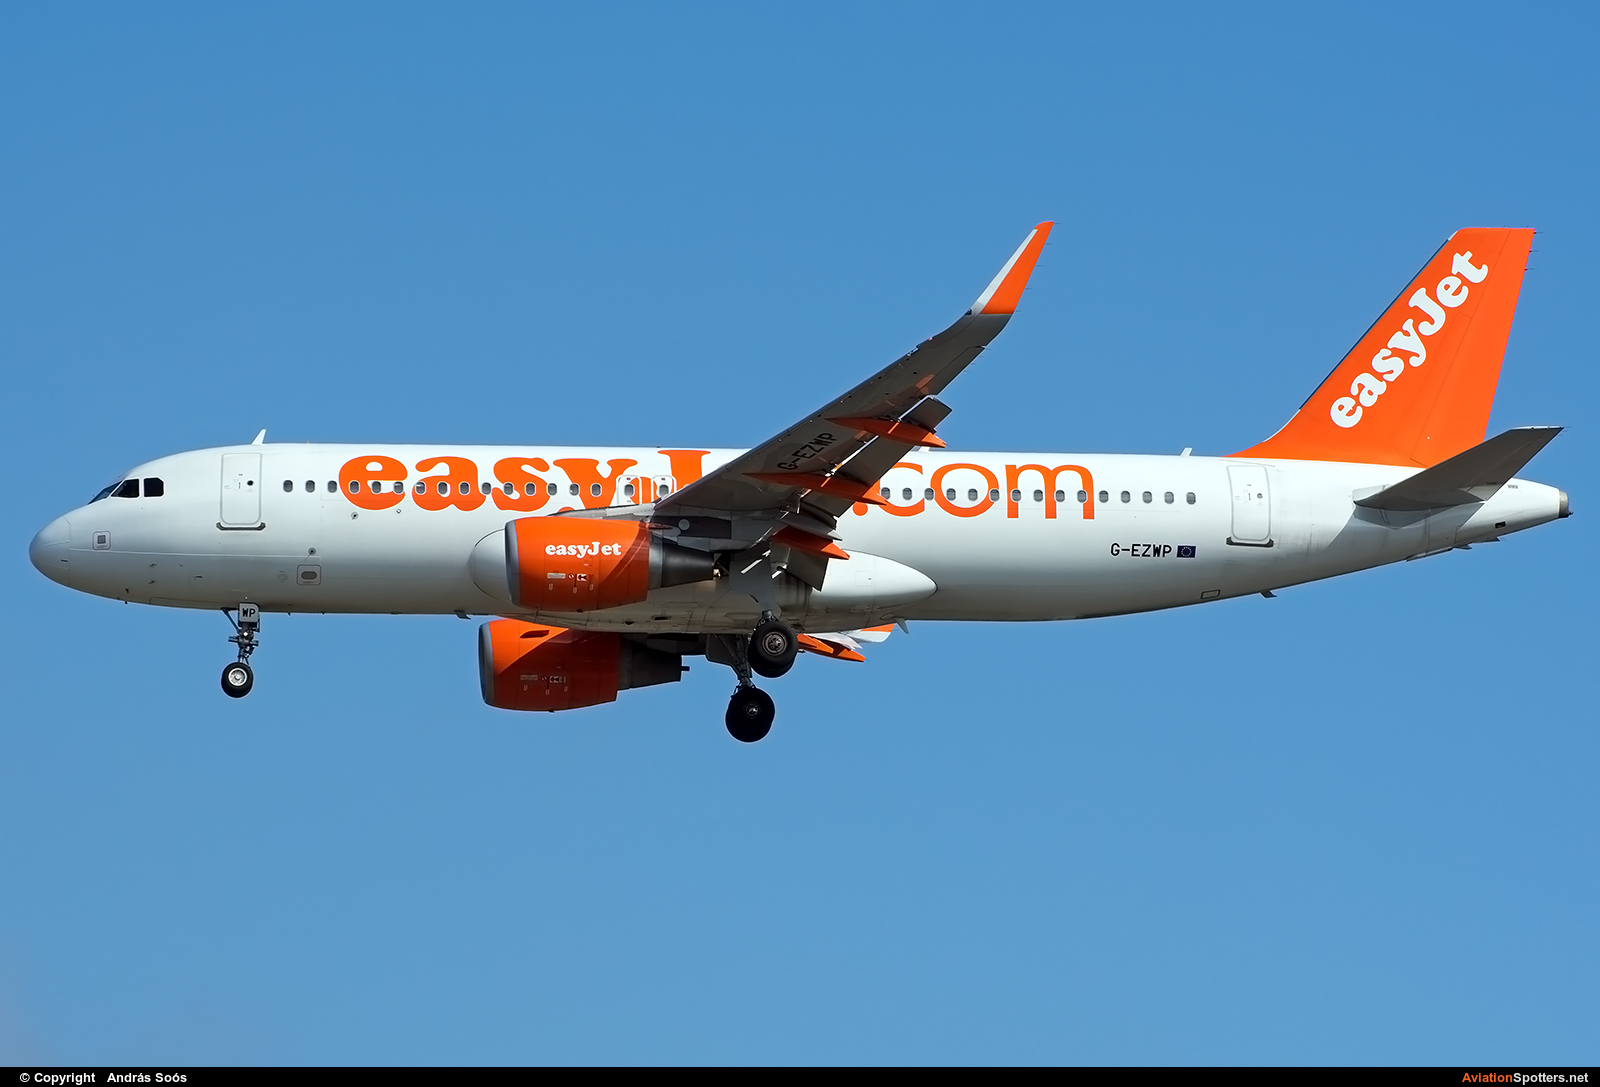 easyJet  -  A320-214  (G-EZWP) By András Soós (sas1965)